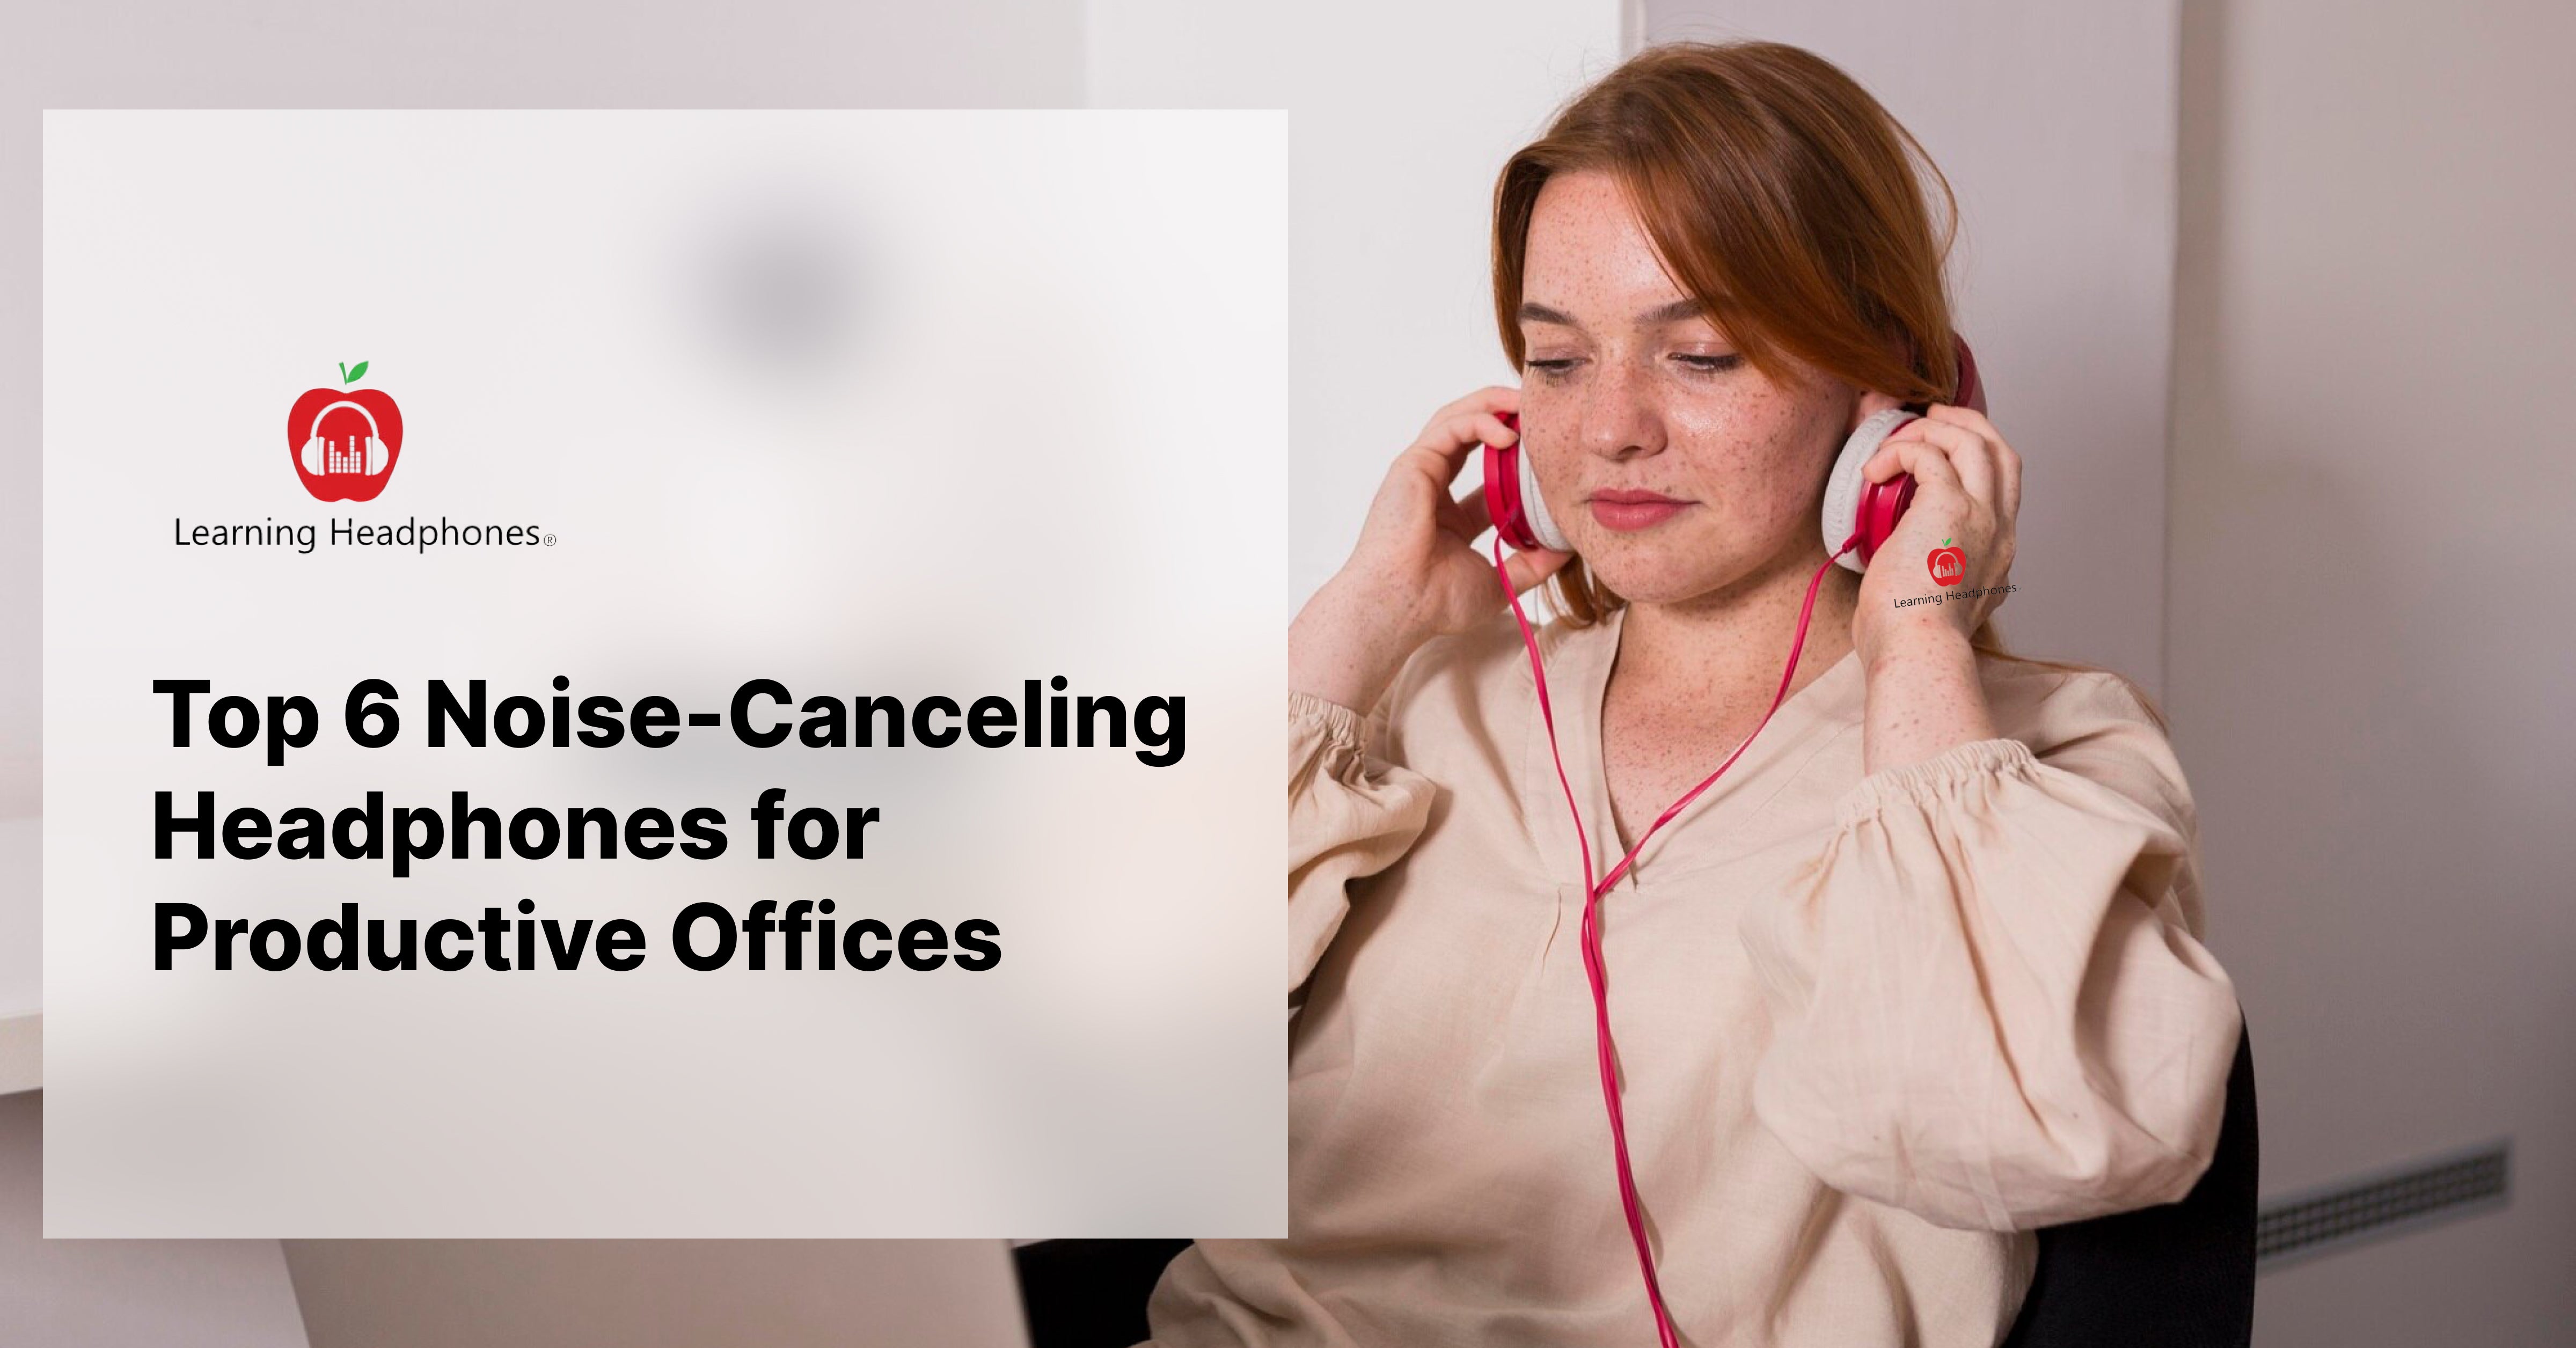 Top 6 Noise-Canceling Headphones for Productive Offices